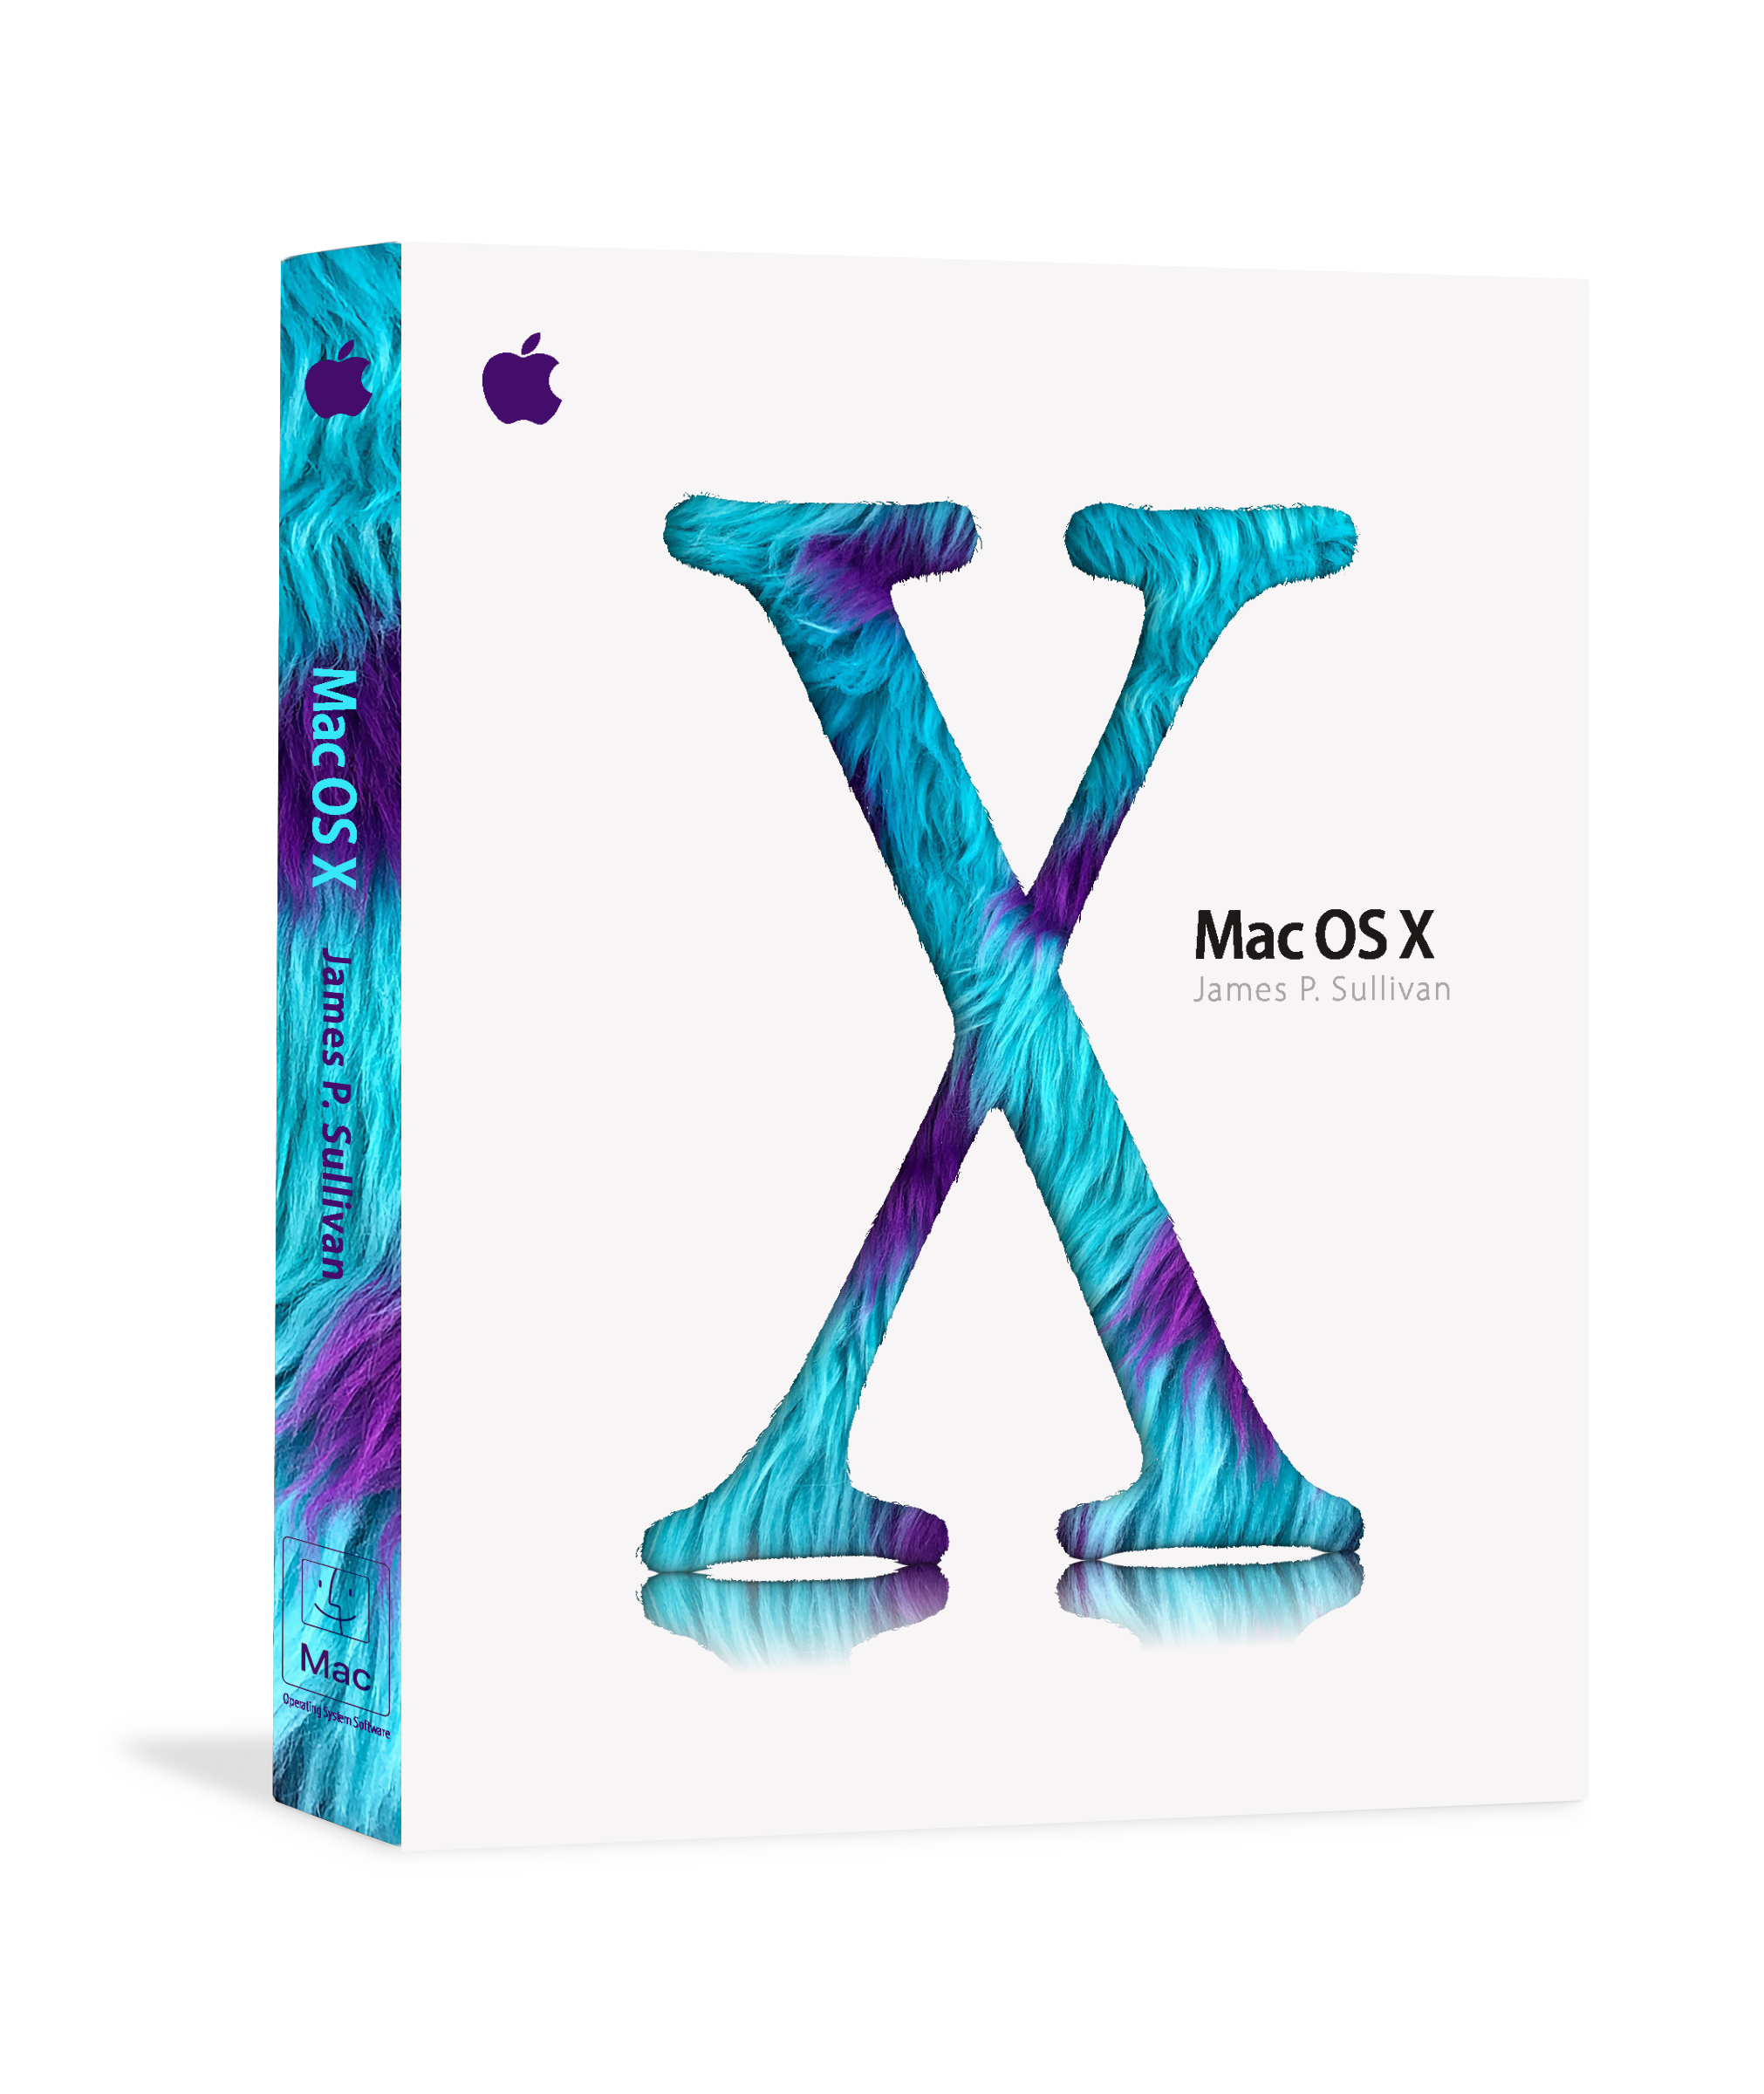 Mac OS X 10.2 Jaguar box with Monsters Inc. “Sulley” colored faux fur X logo and branding.